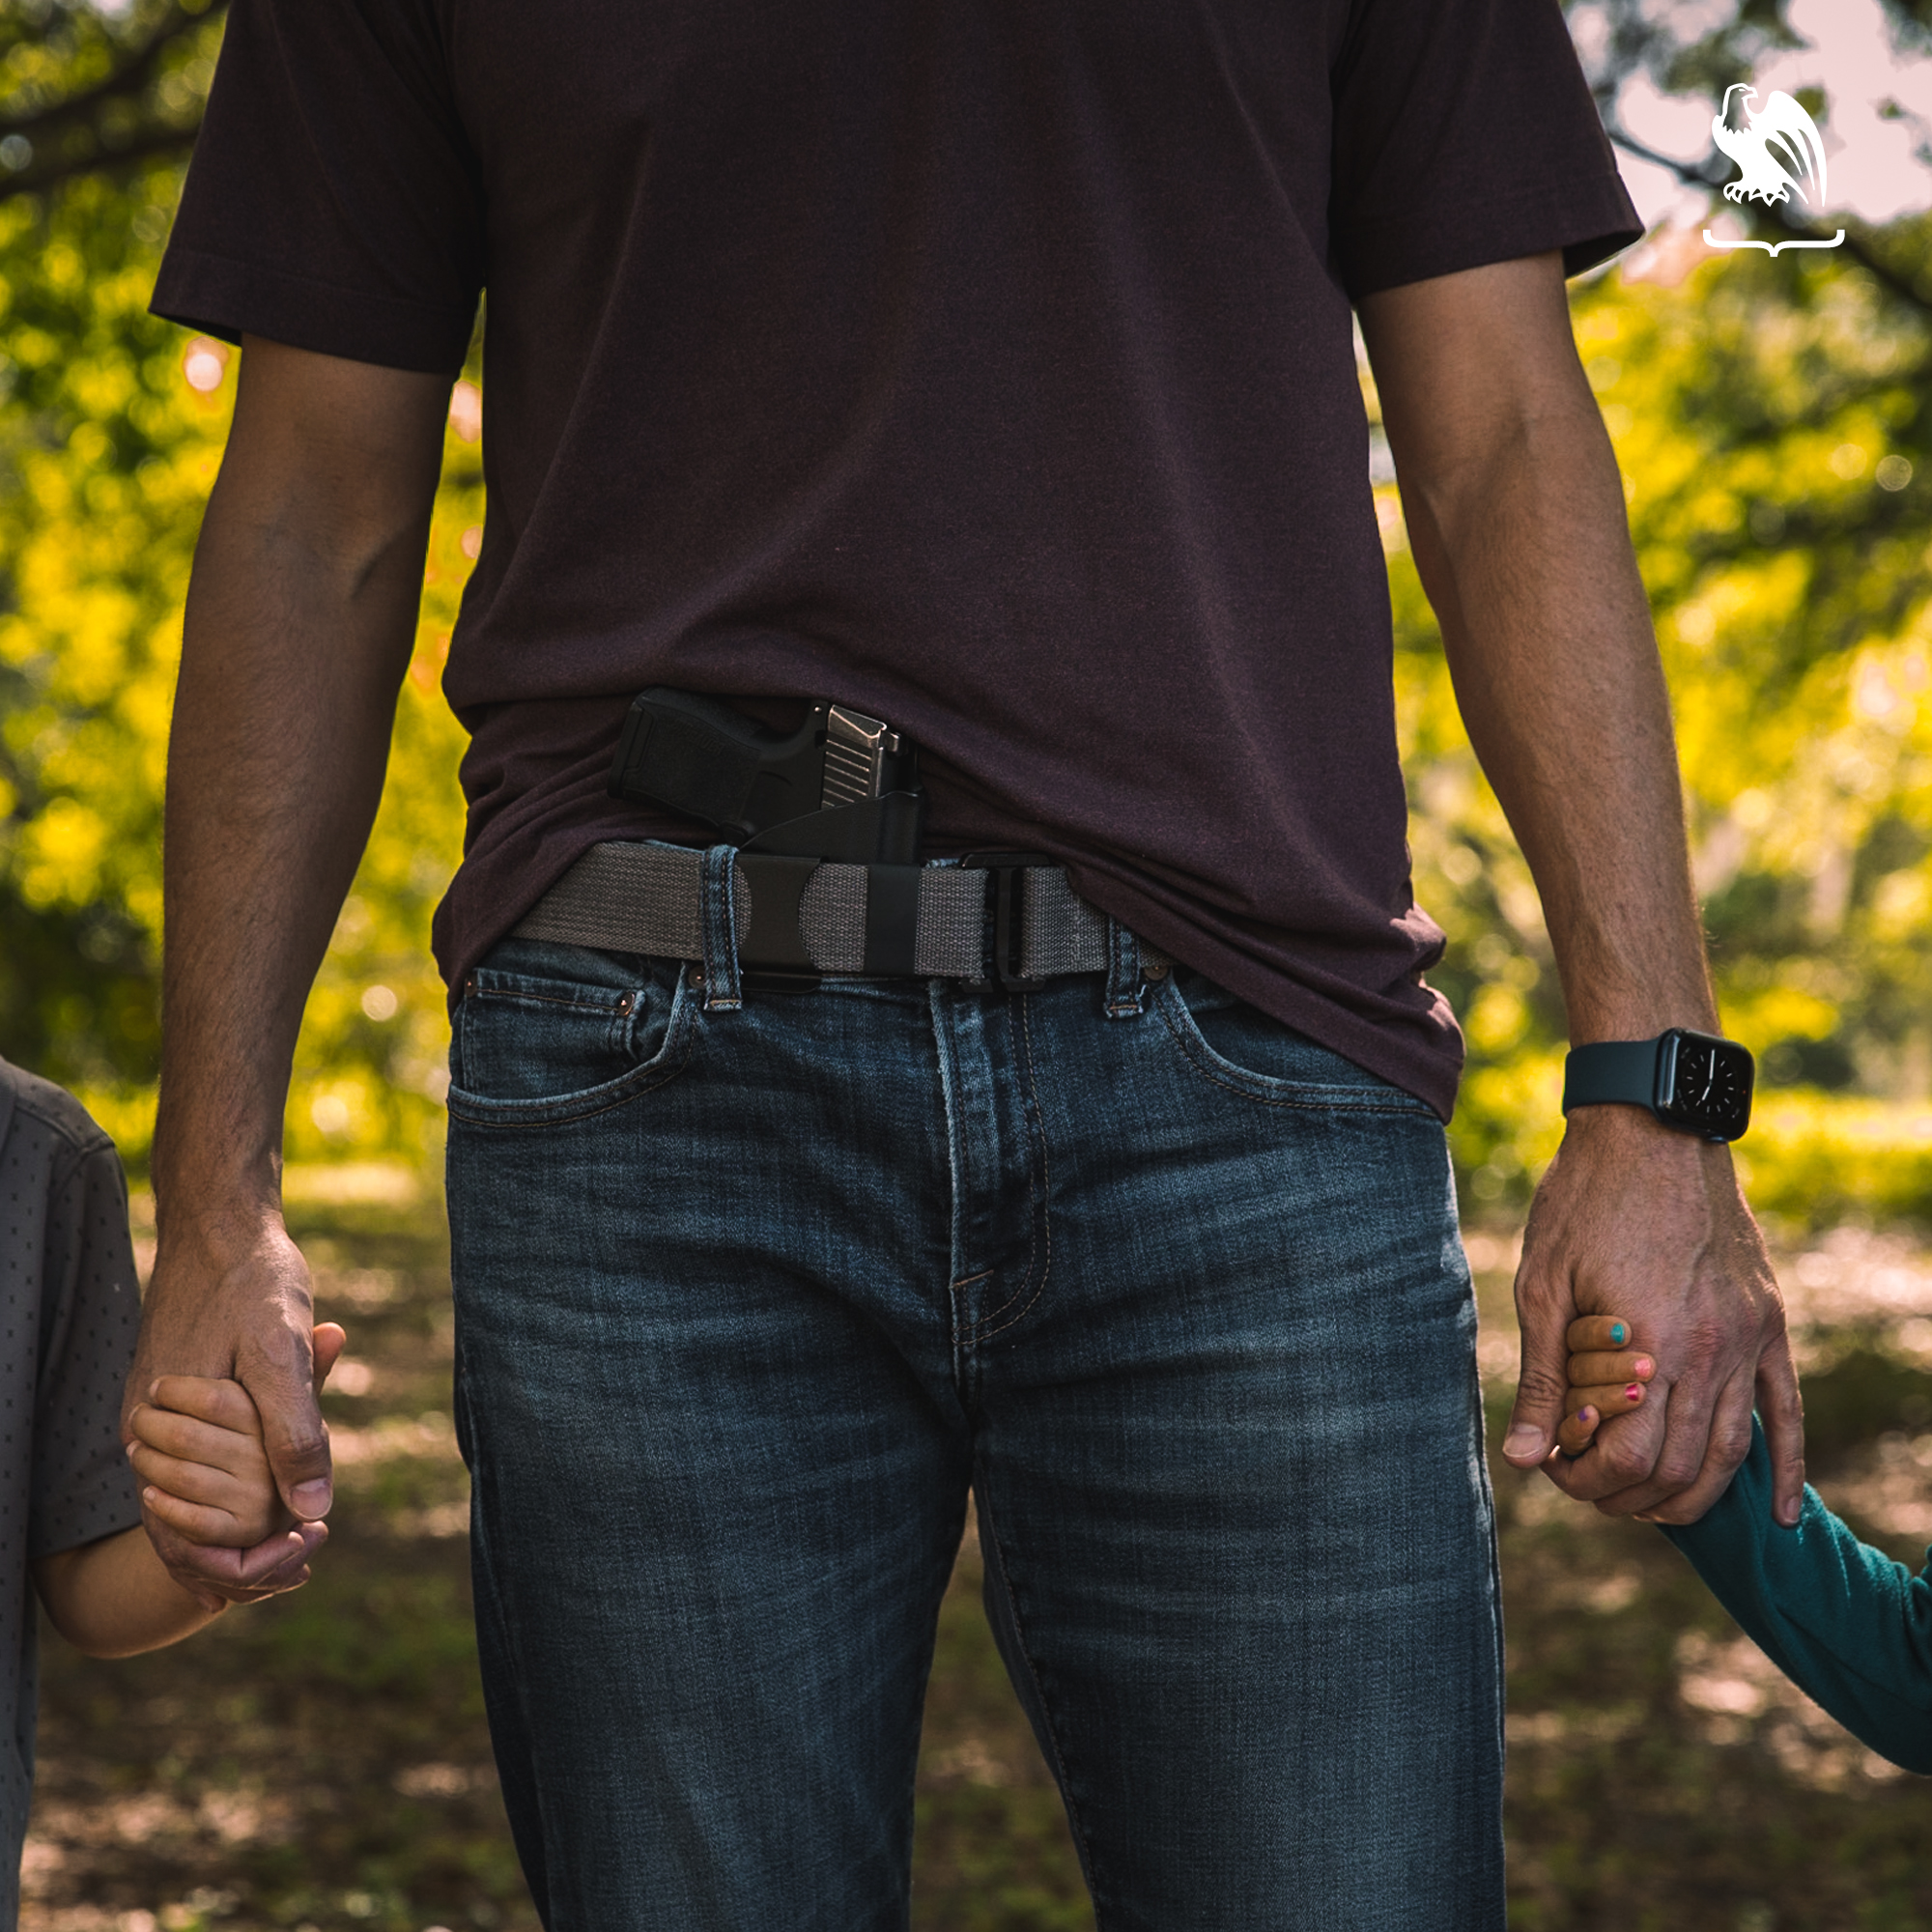 Generic Image of father holding kids hands while concealed carrying